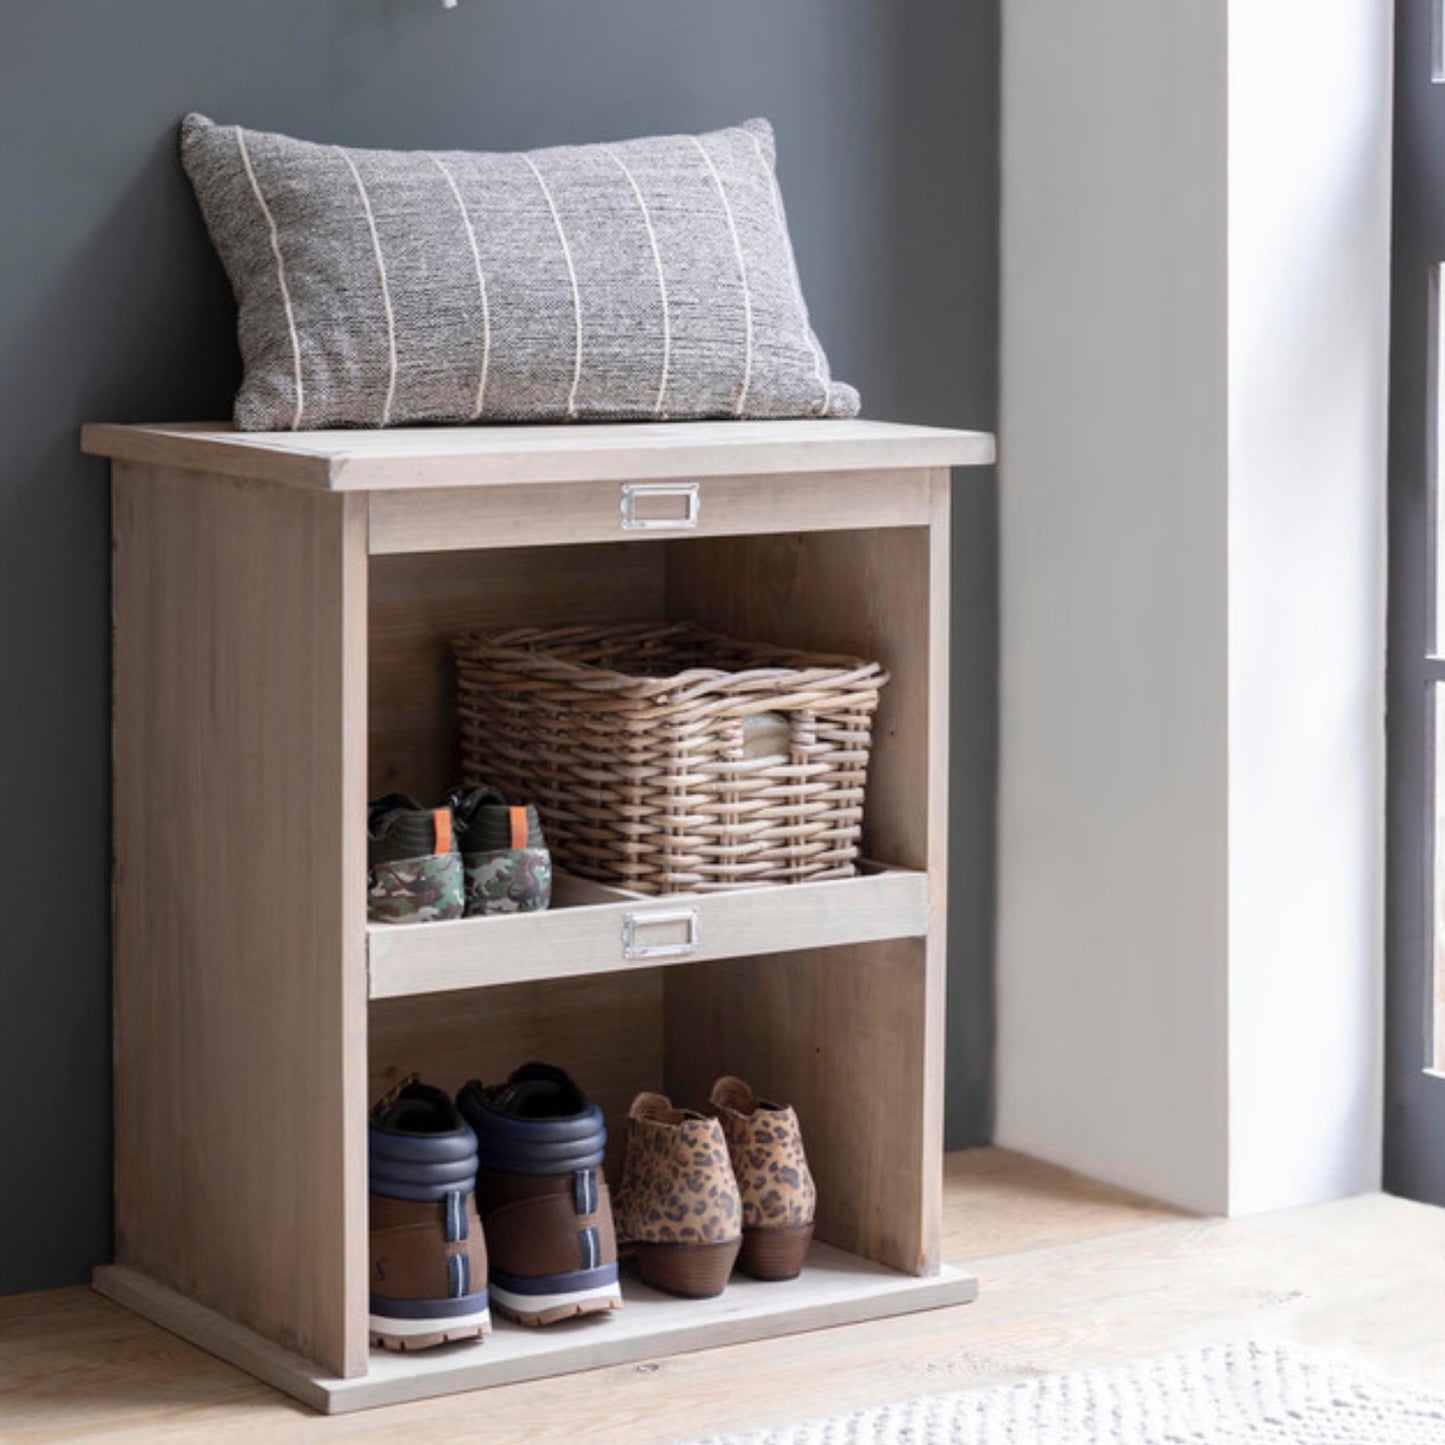 Chedworth Shelving Small by Garden Trading - Spruce